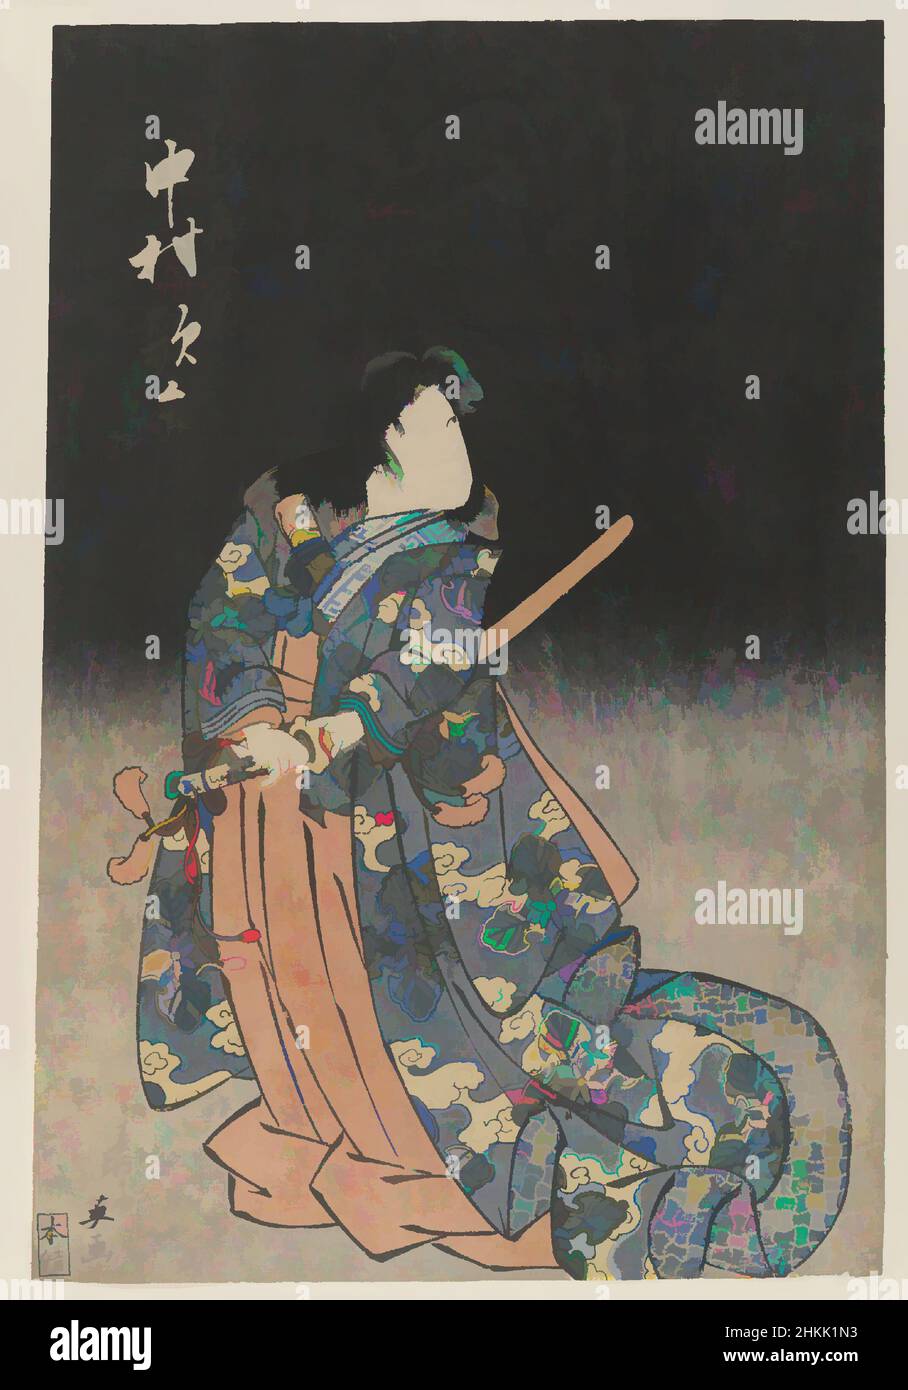 Art inspired by Theatrical Male Character with Sword, Woodblock color print, Japan, mat: 13 7/16 x 9 1/16 in., 34.1 x 23 cm, Acting, Actor, Character, Costume, Edo Period, Japan, Japanese, Kabuki, Poetry, Samurai, Stage, Sword, Theatre, Ukiyo-e, Classic works modernized by Artotop with a splash of modernity. Shapes, color and value, eye-catching visual impact on art. Emotions through freedom of artworks in a contemporary way. A timeless message pursuing a wildly creative new direction. Artists turning to the digital medium and creating the Artotop NFT Stock Photo